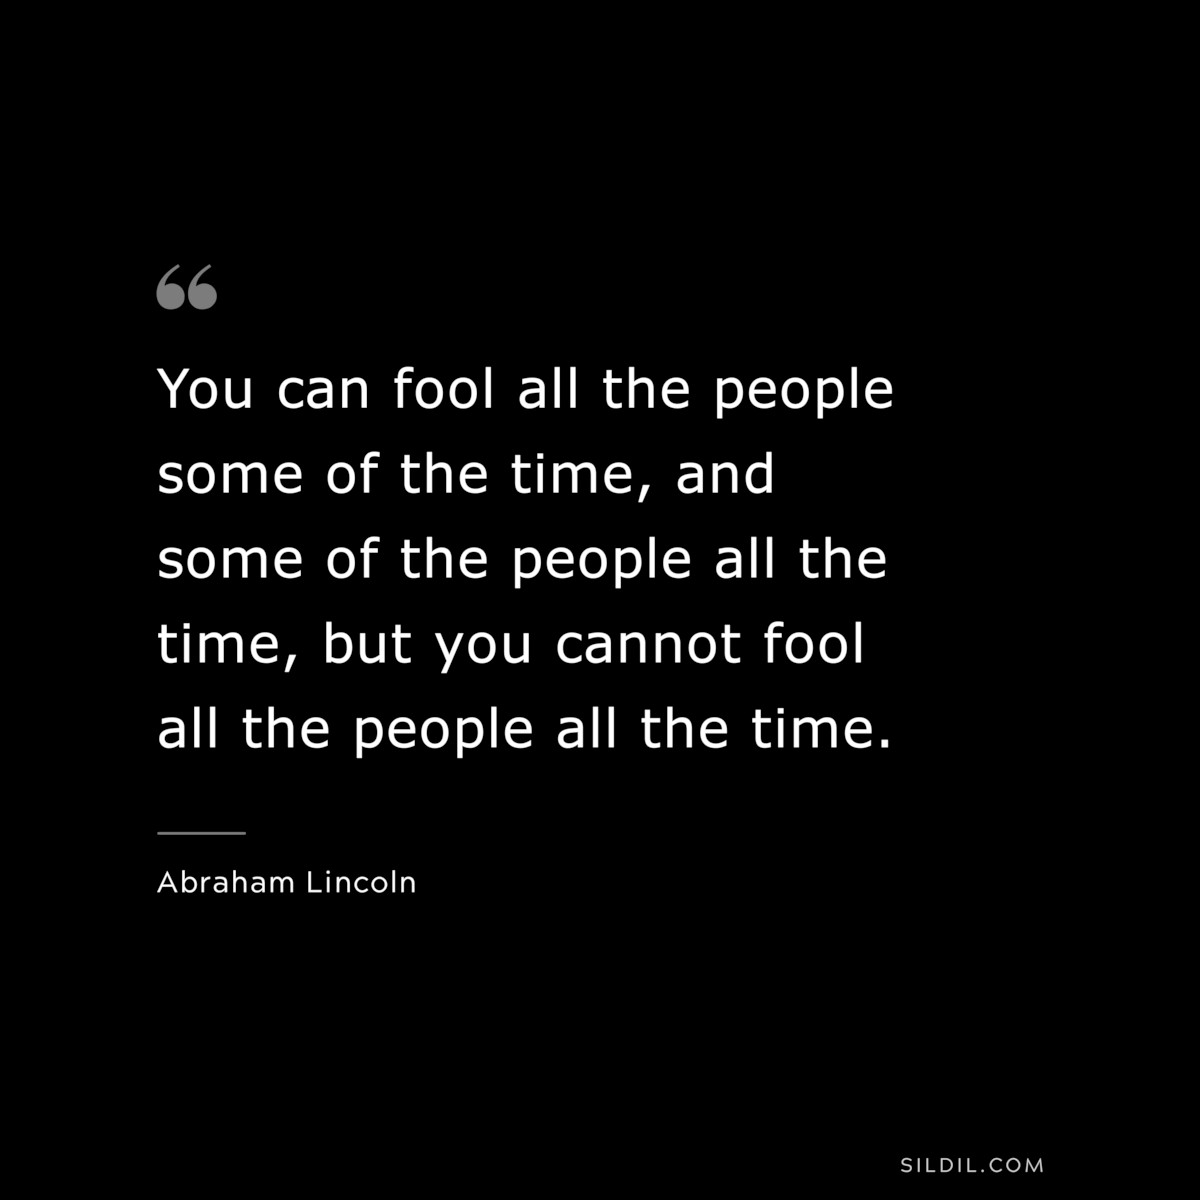 You can fool all the people some of the time, and some of the people all the time, but you cannot fool all the people all the time. ― Abraham Lincoln